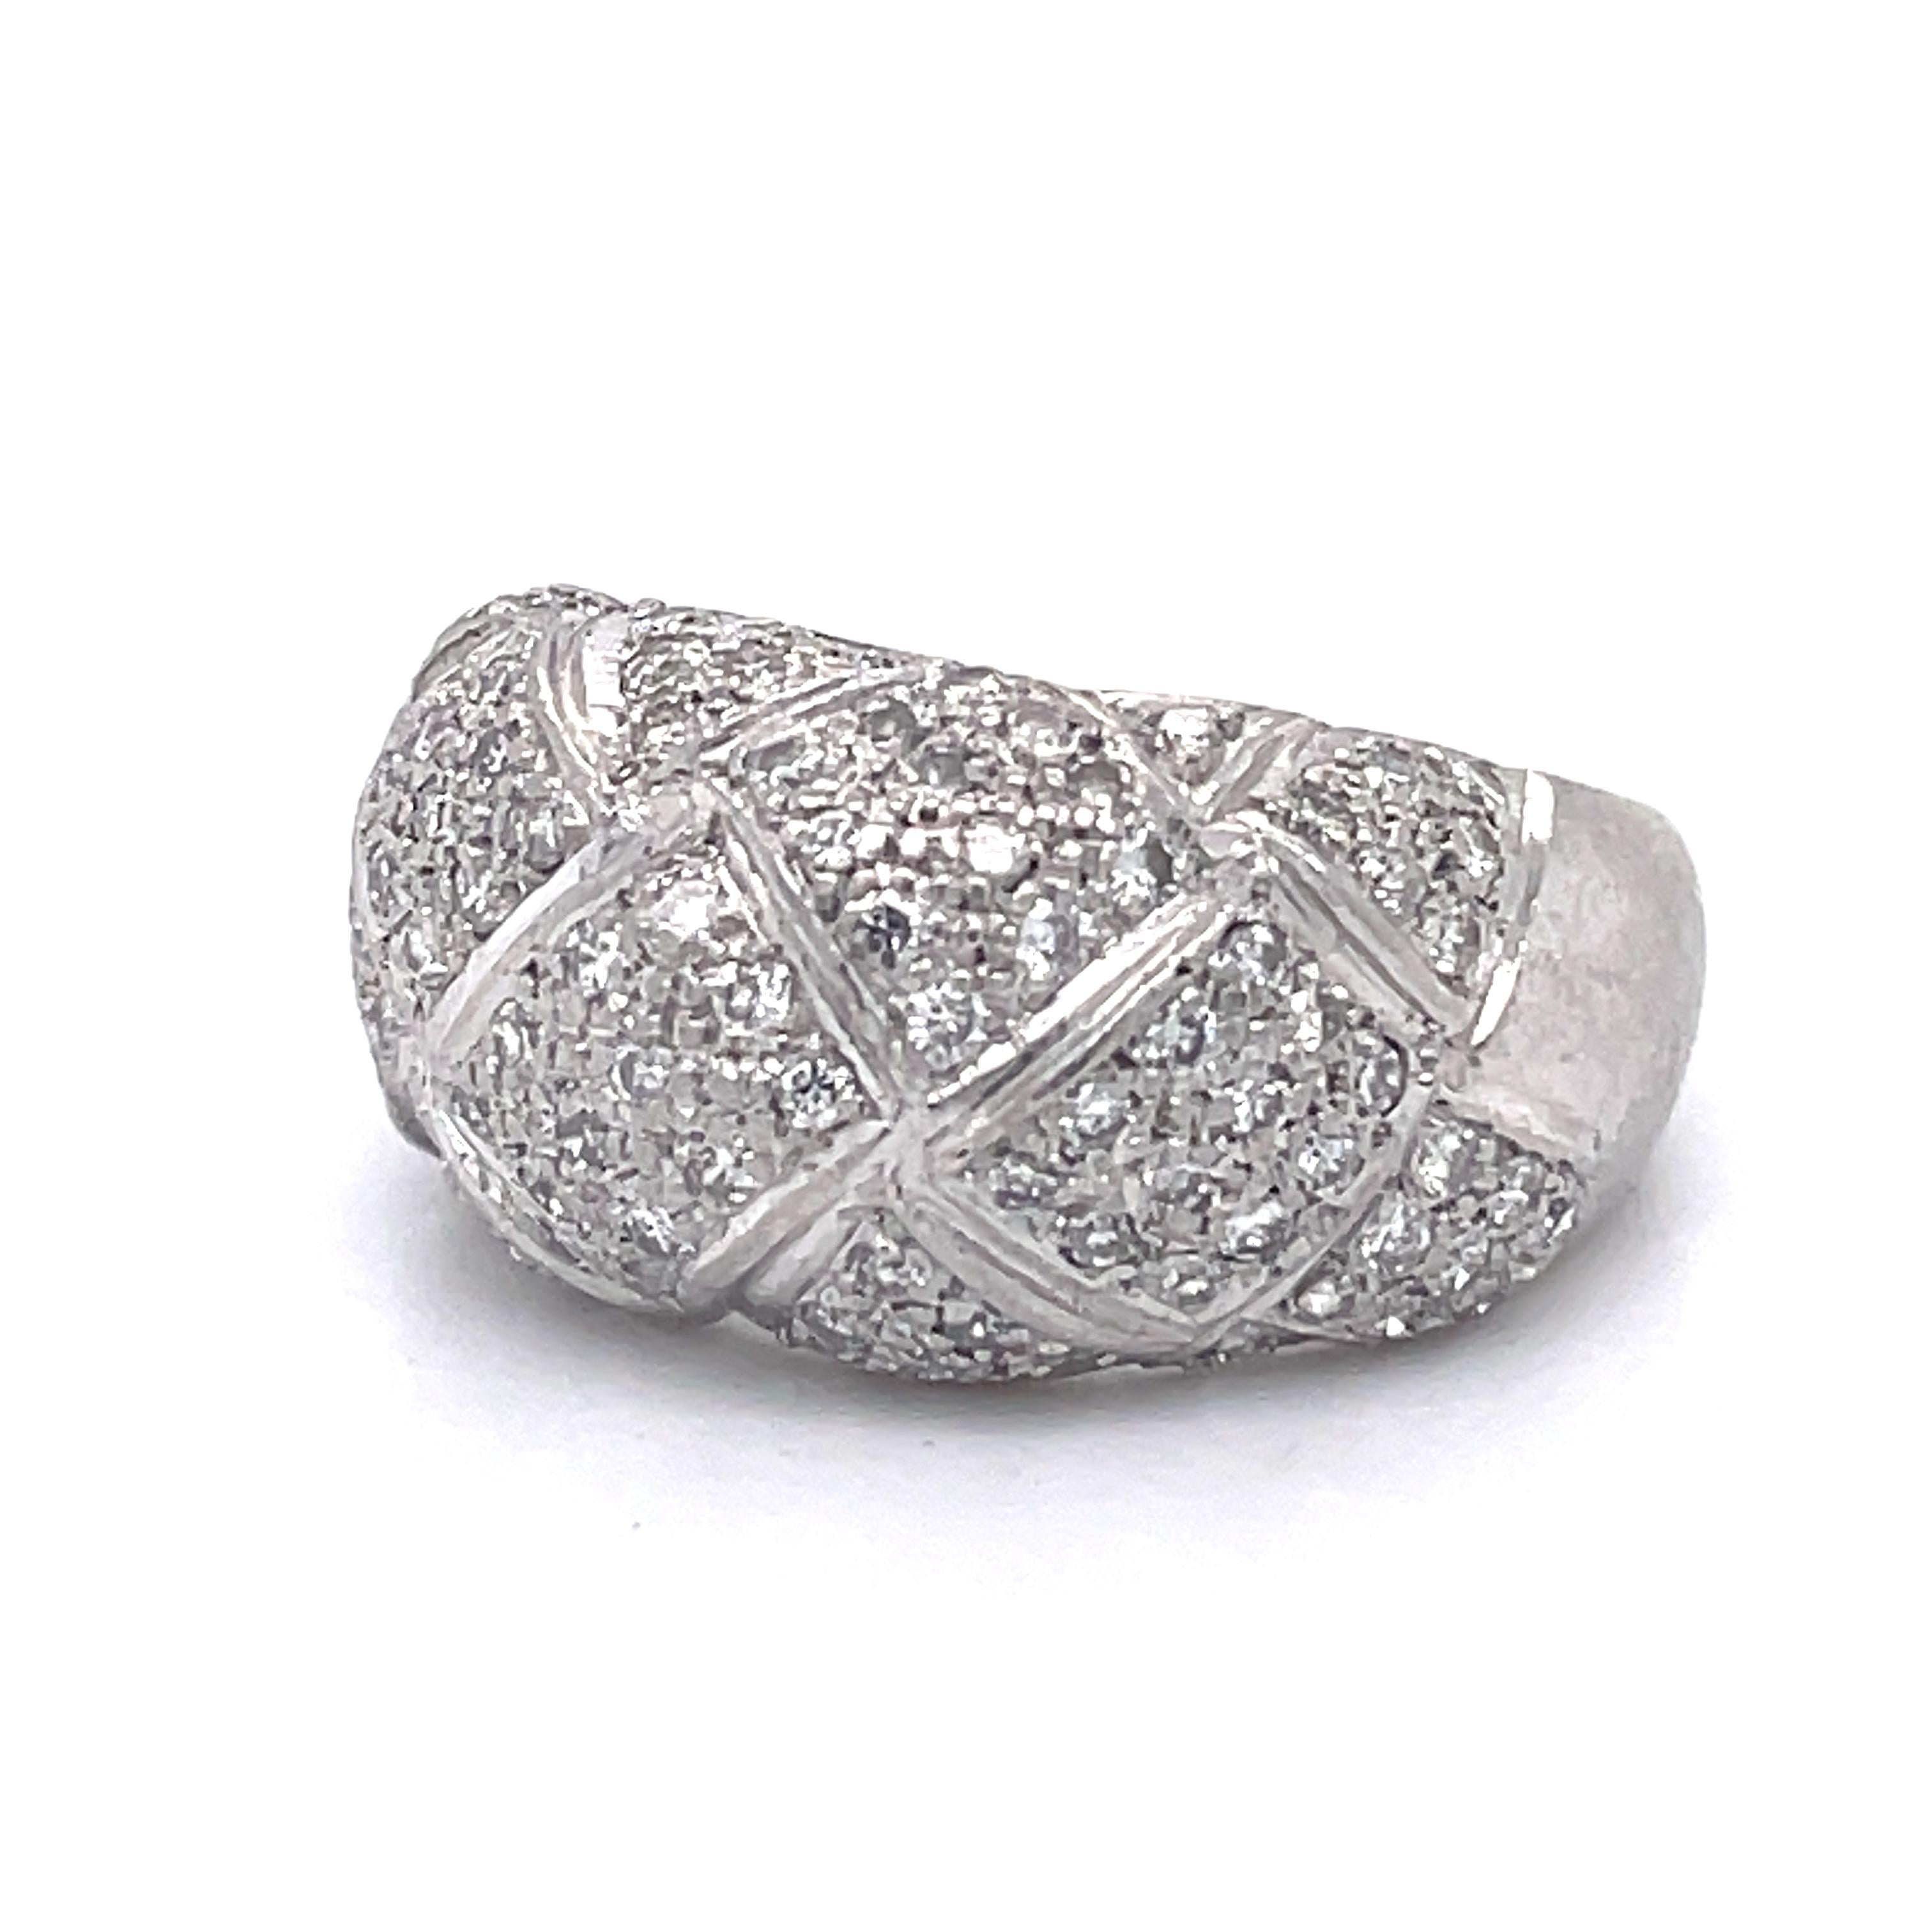 Jewelry Material: Platinum 900 (the gold has been tested by a professional)
Total Carat Weight: 1ct (Approx.)
Total Metal Weight: 13.07g
Size: 17.45 mm (inner diameter)

Grading Results:
Stone Type: Diamond
Shape: Round
Carat: 1ct (Approx.), Stones